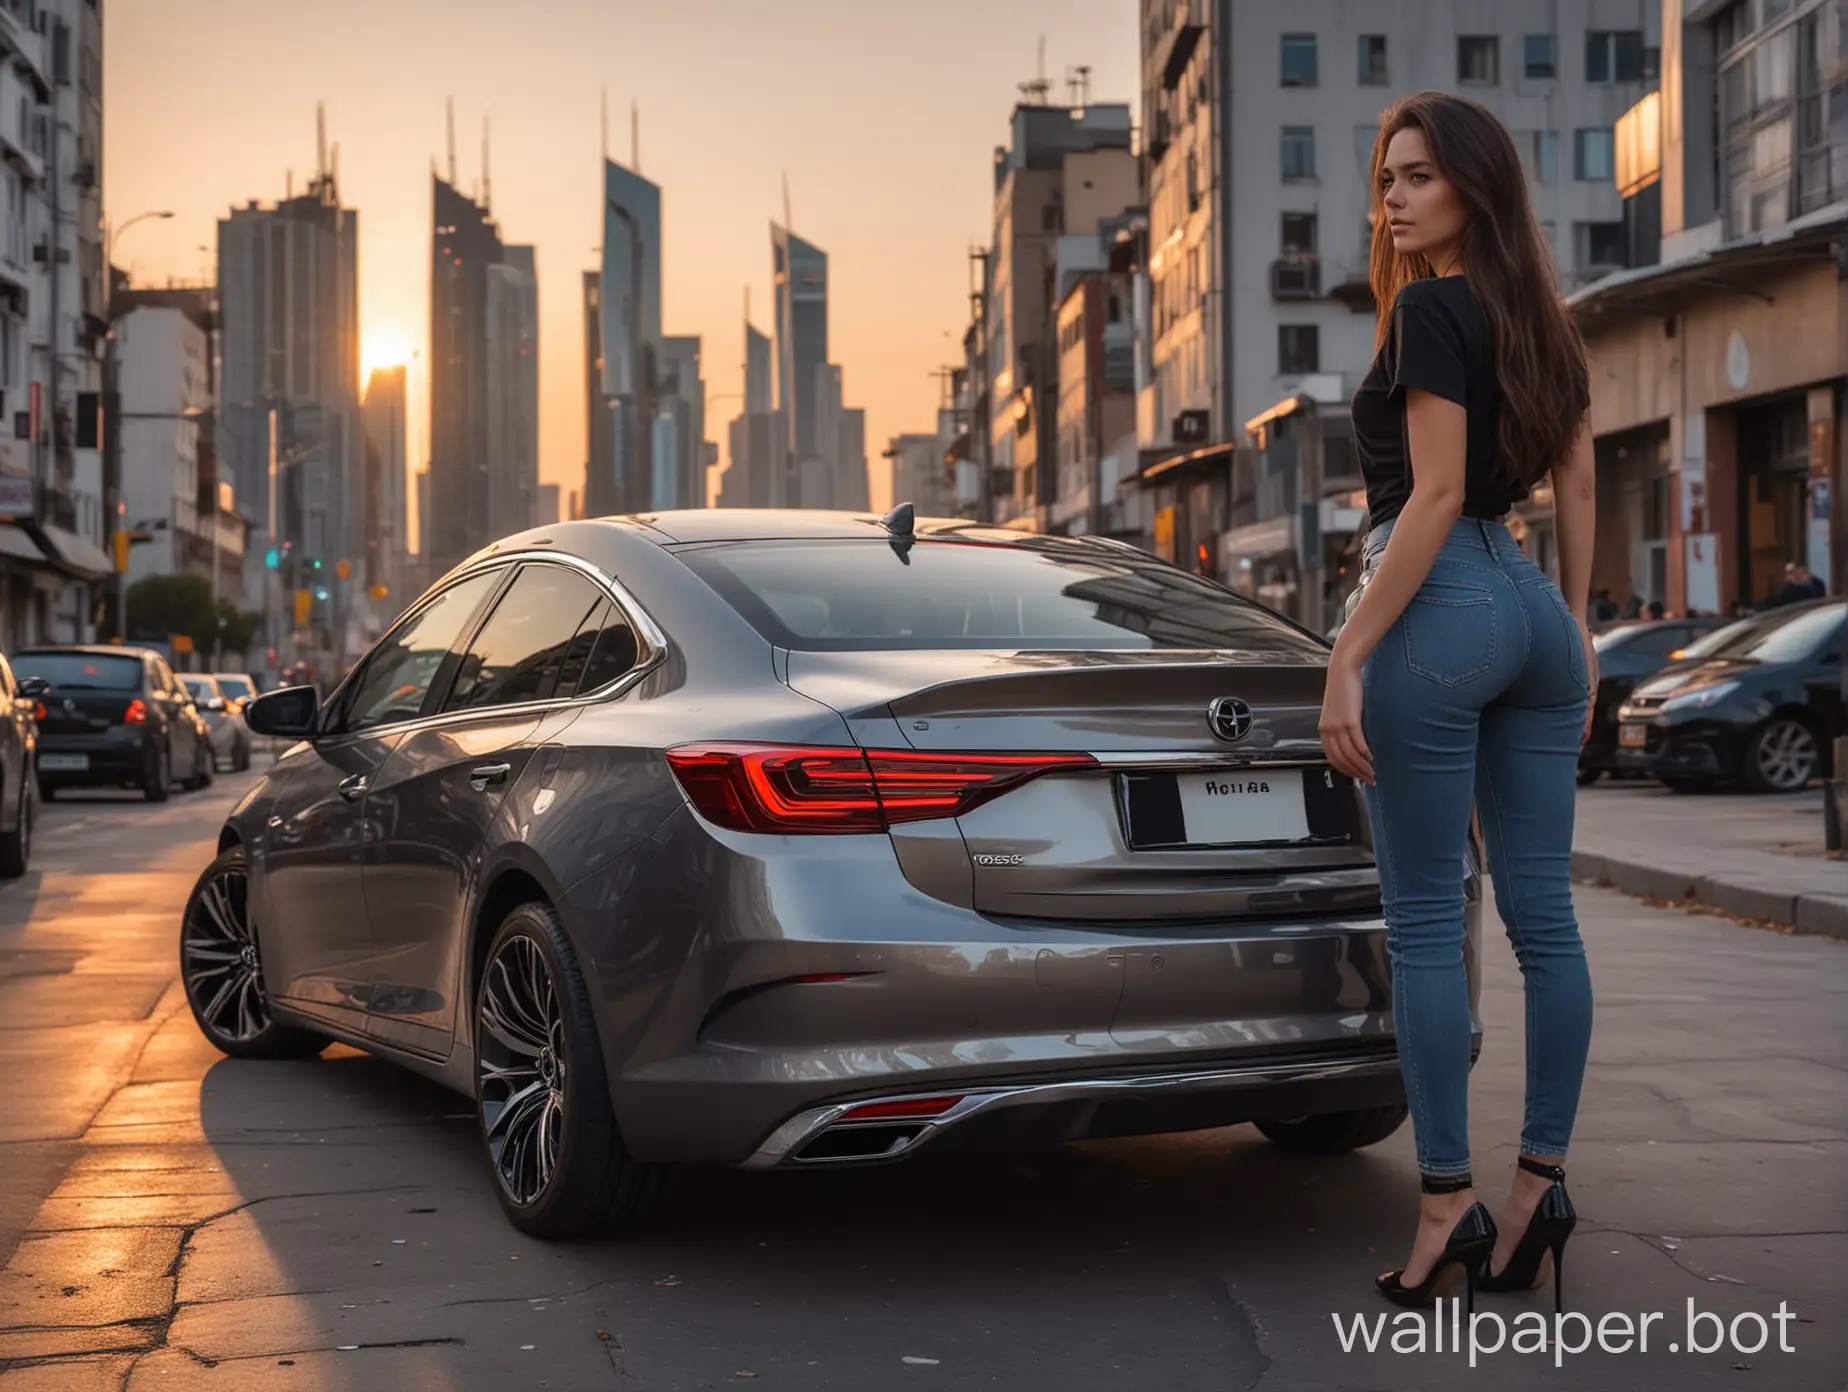 fuller shape woman with long darkbrown hair visible from the back (her face isn't visible), wearing black t-shirt with cleavage, jeans and high heels standing near the right side of a grey opel insignia grandsport car visible from the side. background is a futuristic city at sunset, synthwave style